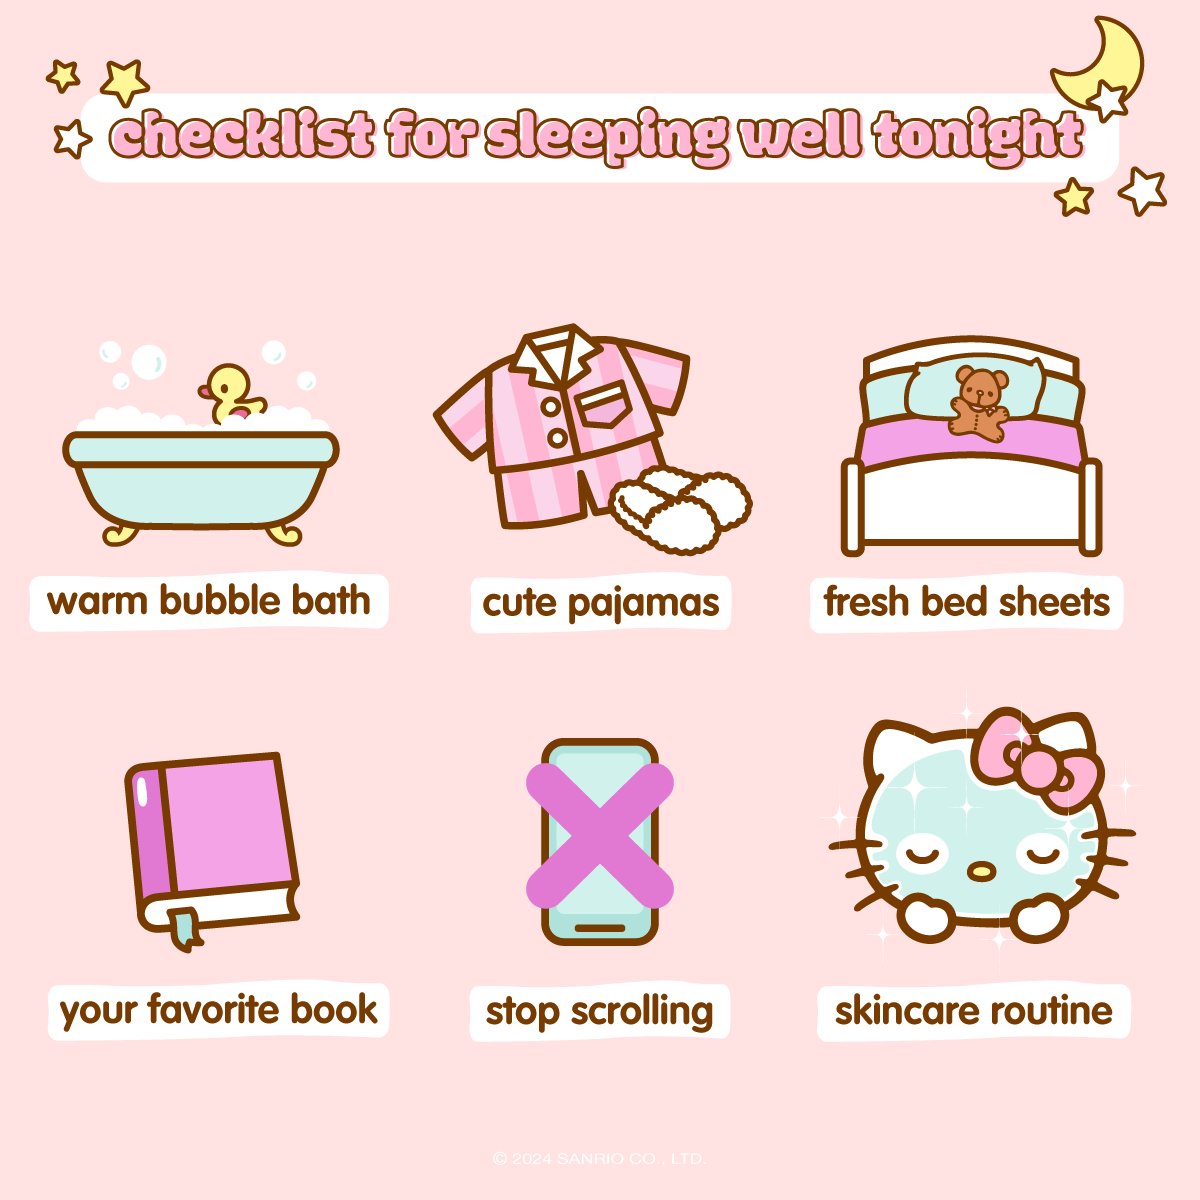 #WellnessWednesday: A well rested night for a brighter tomorrow 💤💖